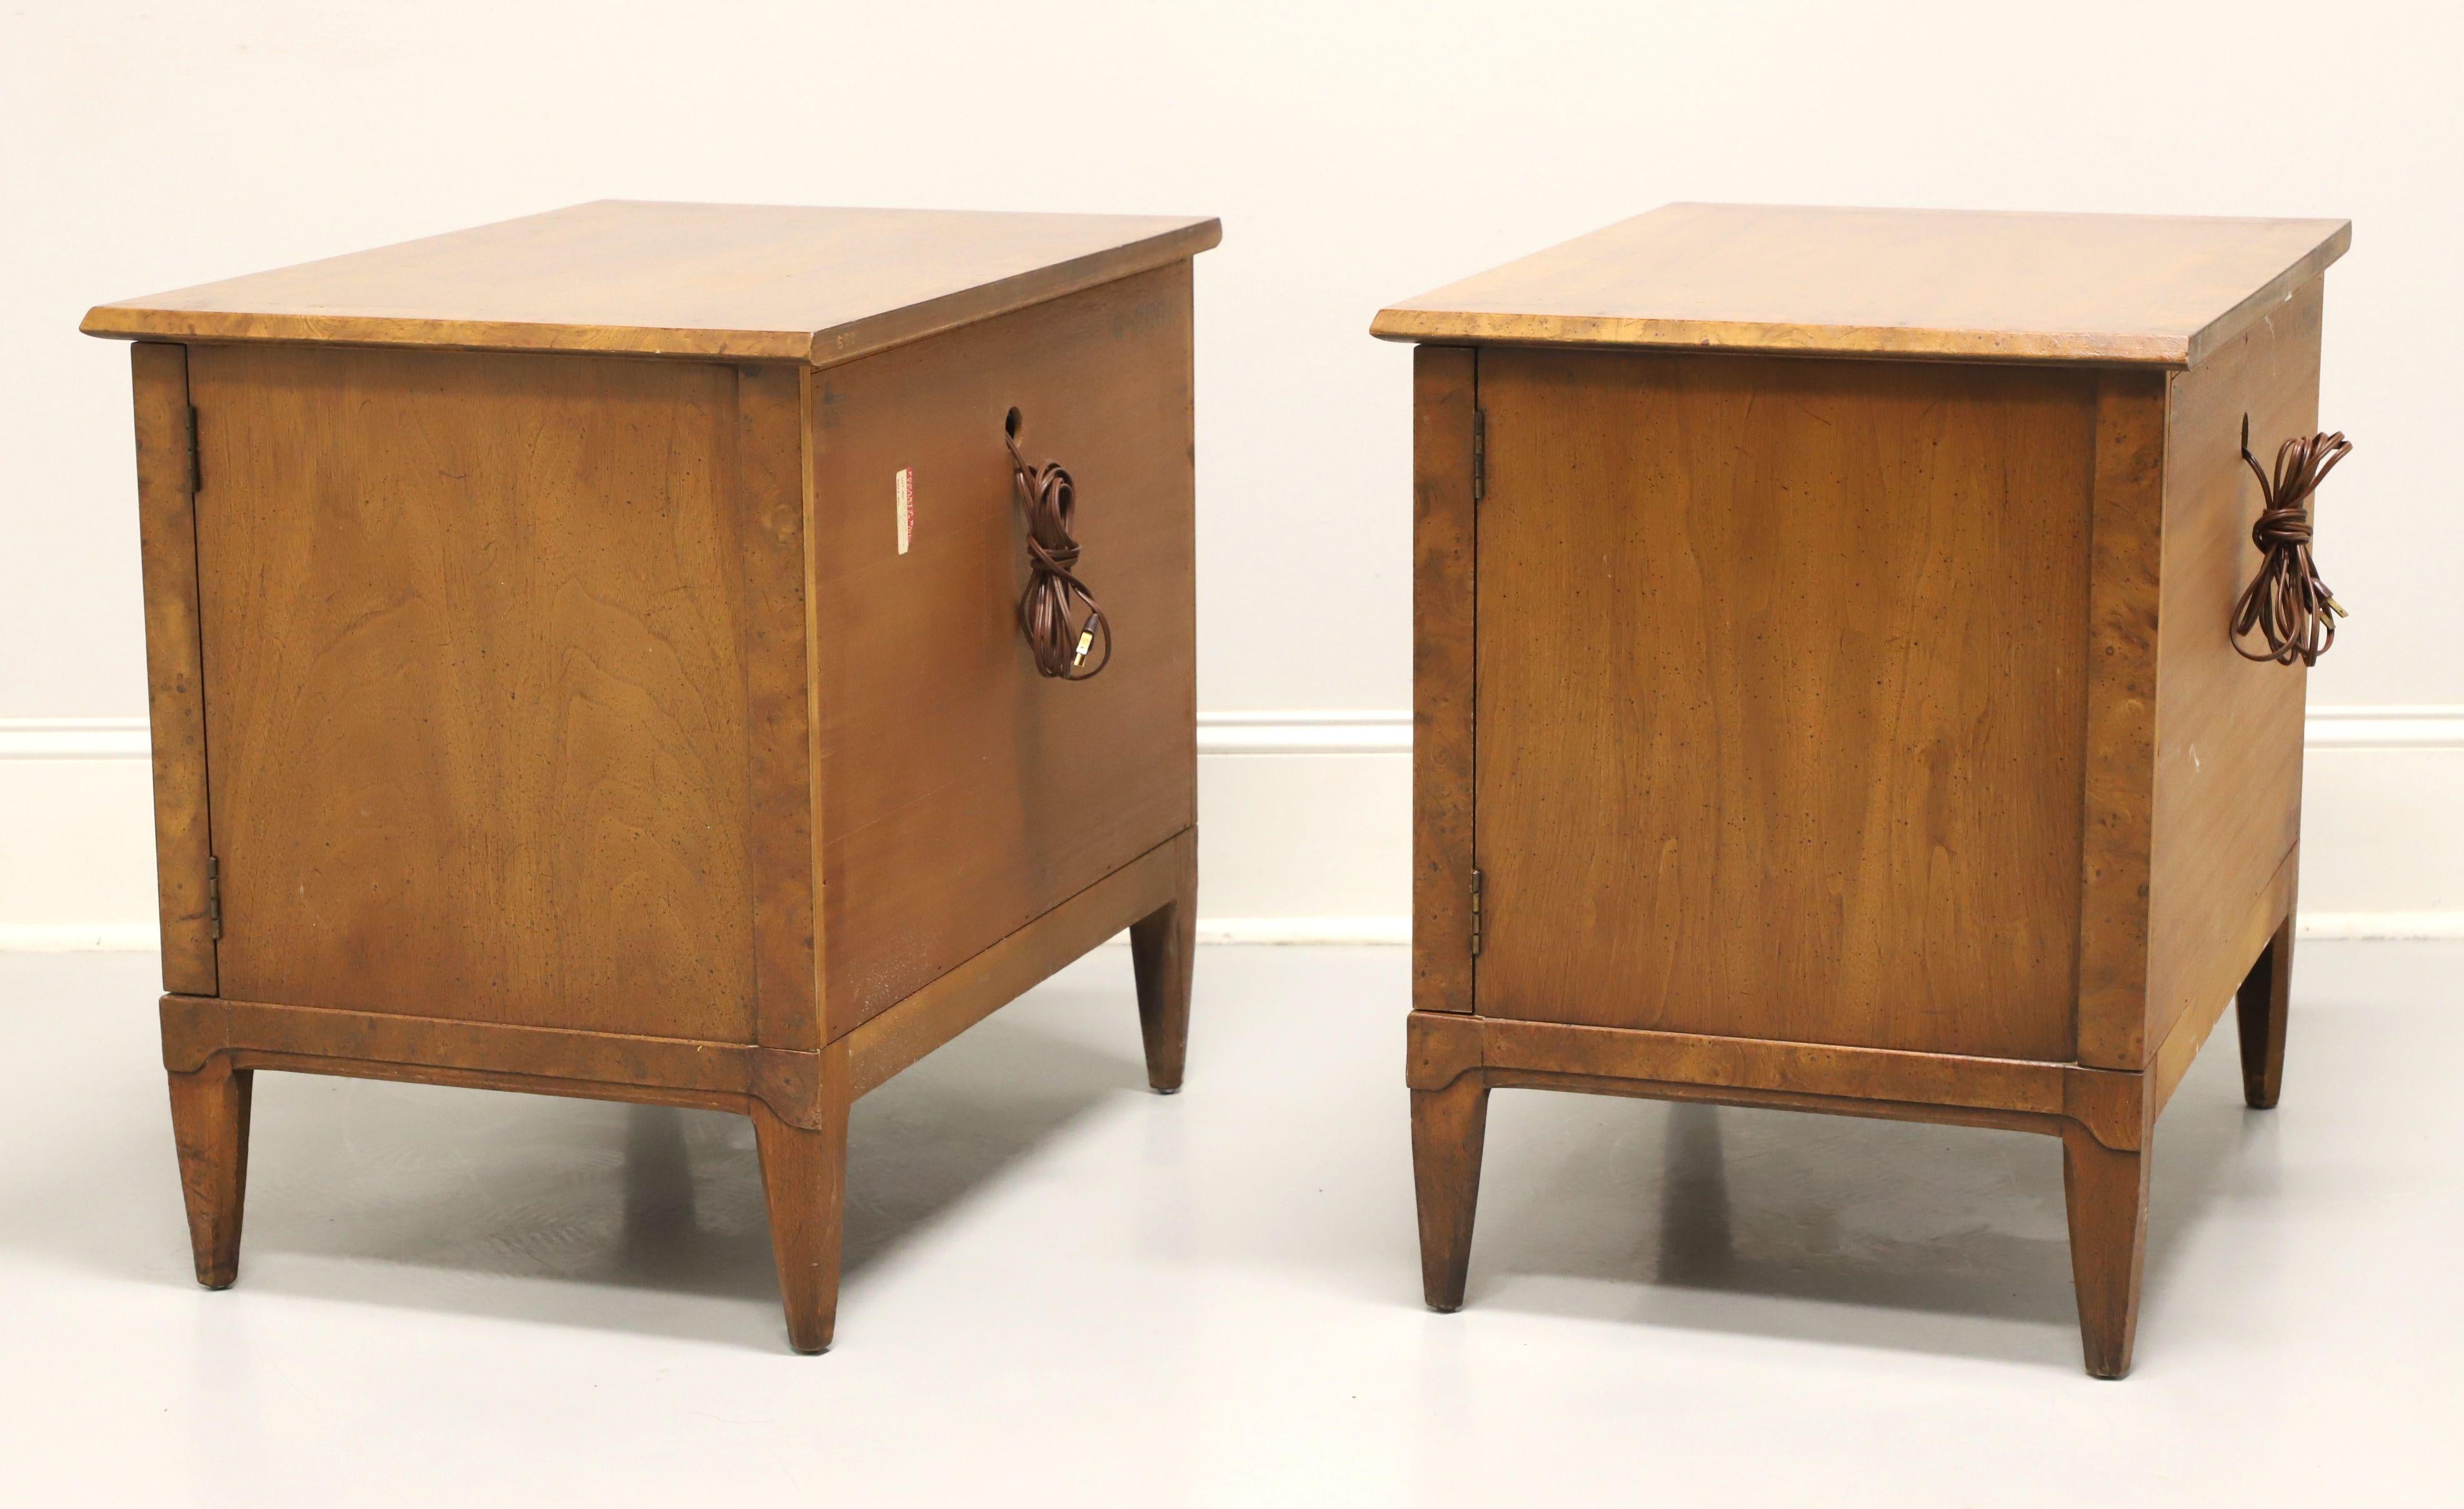 A pair of Mid-20th Century nightstands by Henredon, from their Sequent line. Burlwood, hardwood, brass hardware, burlwood banded top, clean mid-century lines and spade feet. Features a two door cabinet revealing a storage area with one adjustable